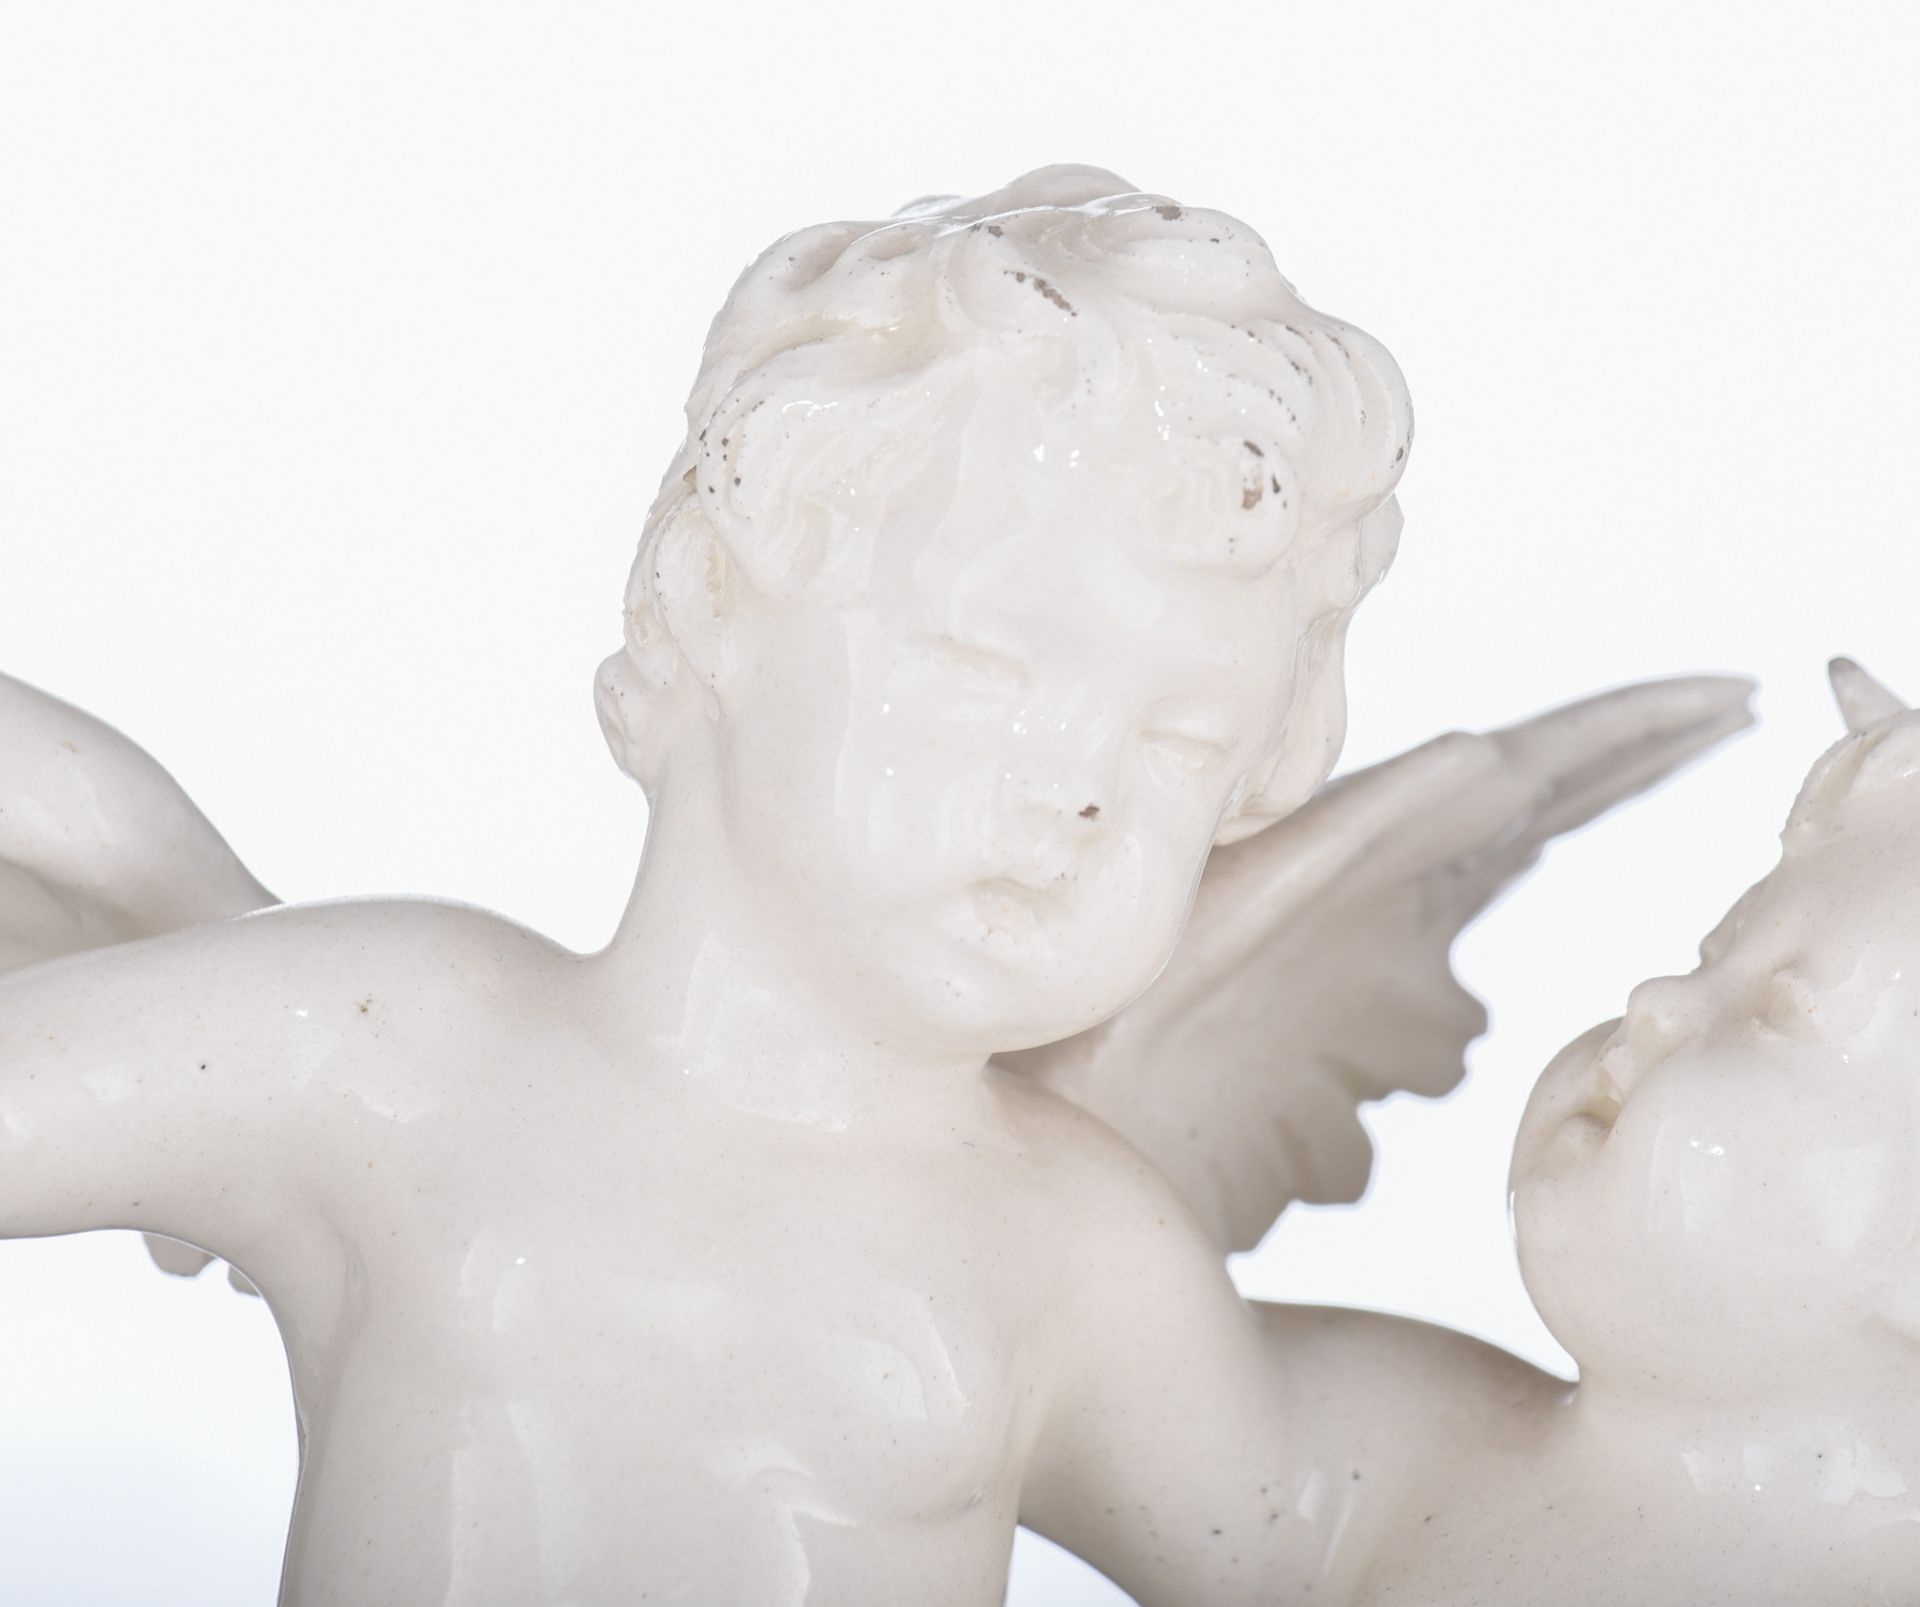 (BIDDING ONLY ON CARLOBONTE.BE) Two white glazed Capodimonte figural groups, Naples, H 20 - 23 cm - Image 12 of 16